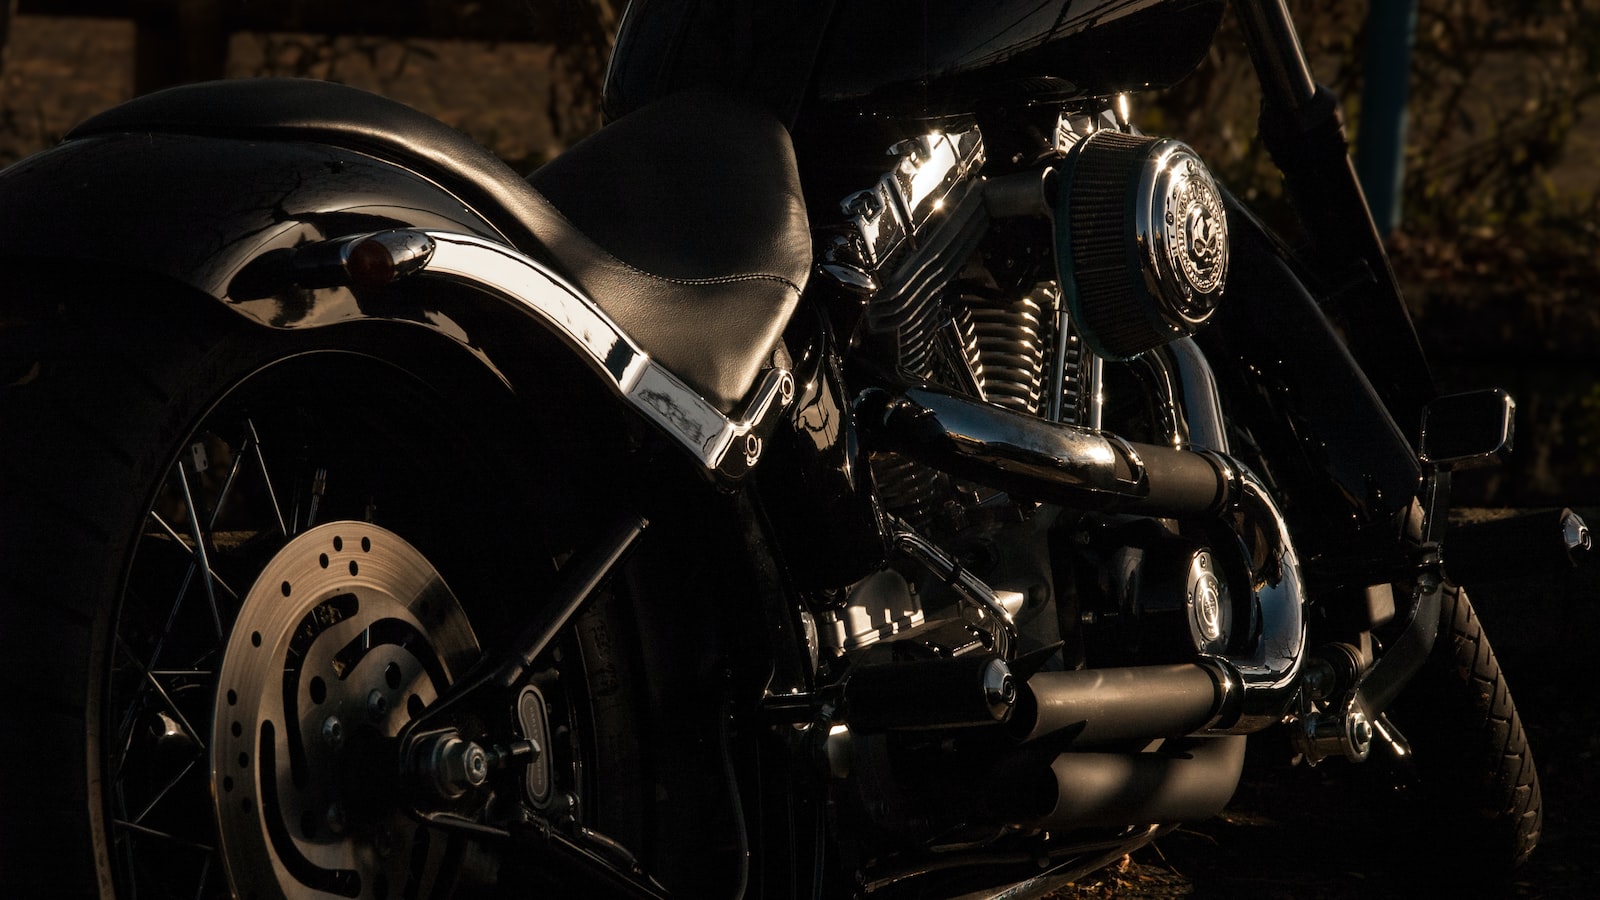 In The Garage With Our Experts: Dive Deep Into The Mechanics Of Motorcycle Models